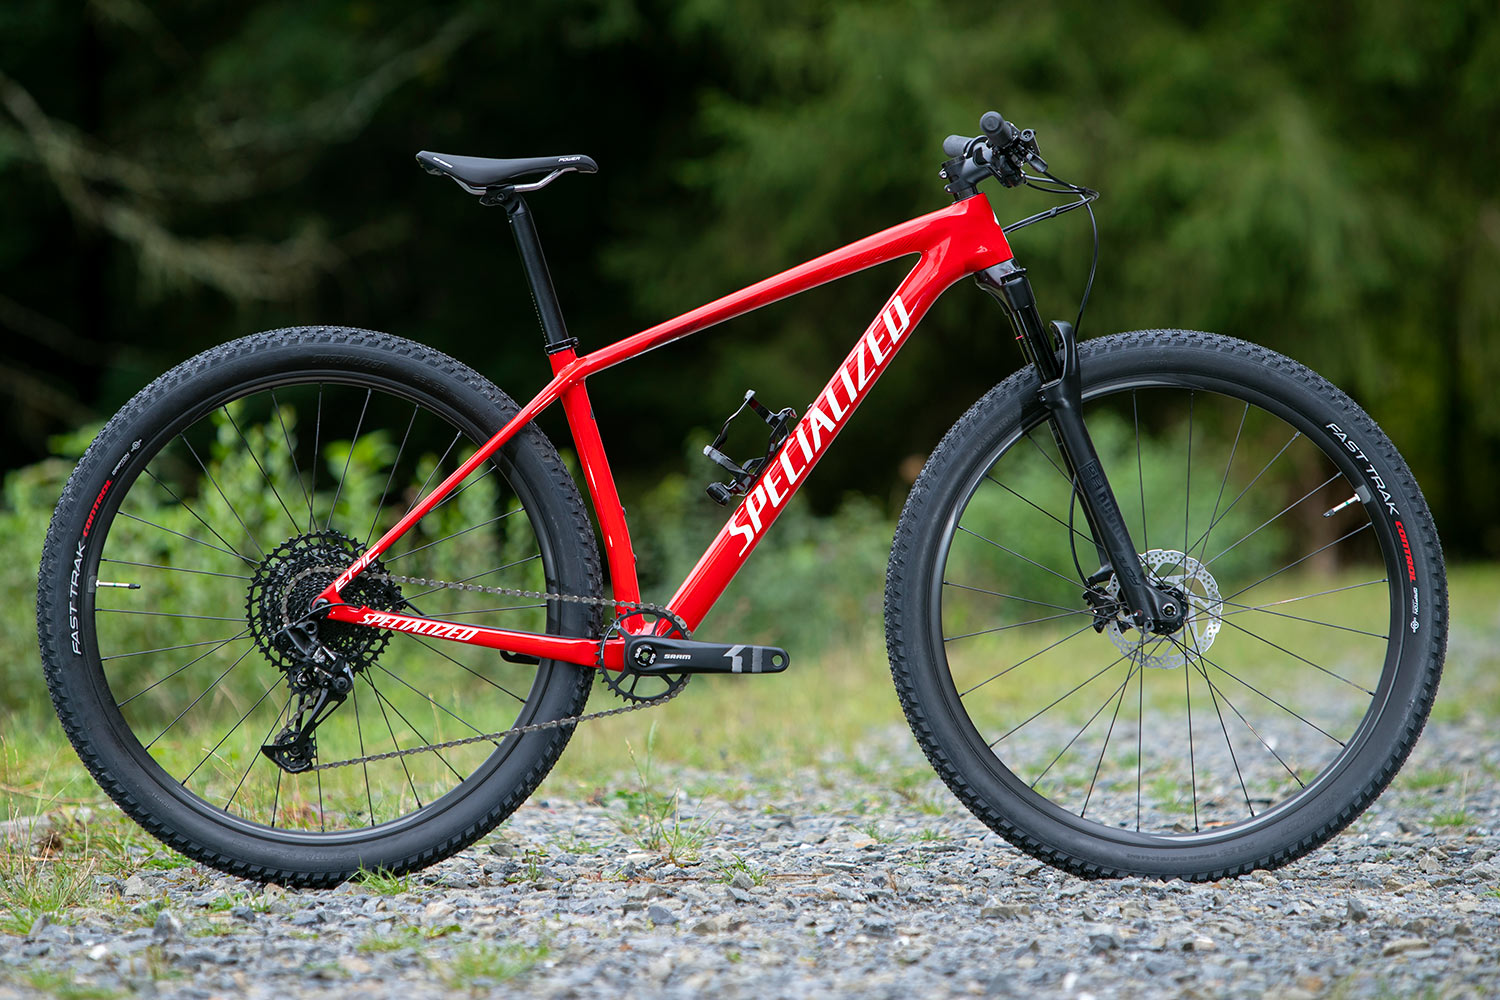 Specialized Epic Hardtail